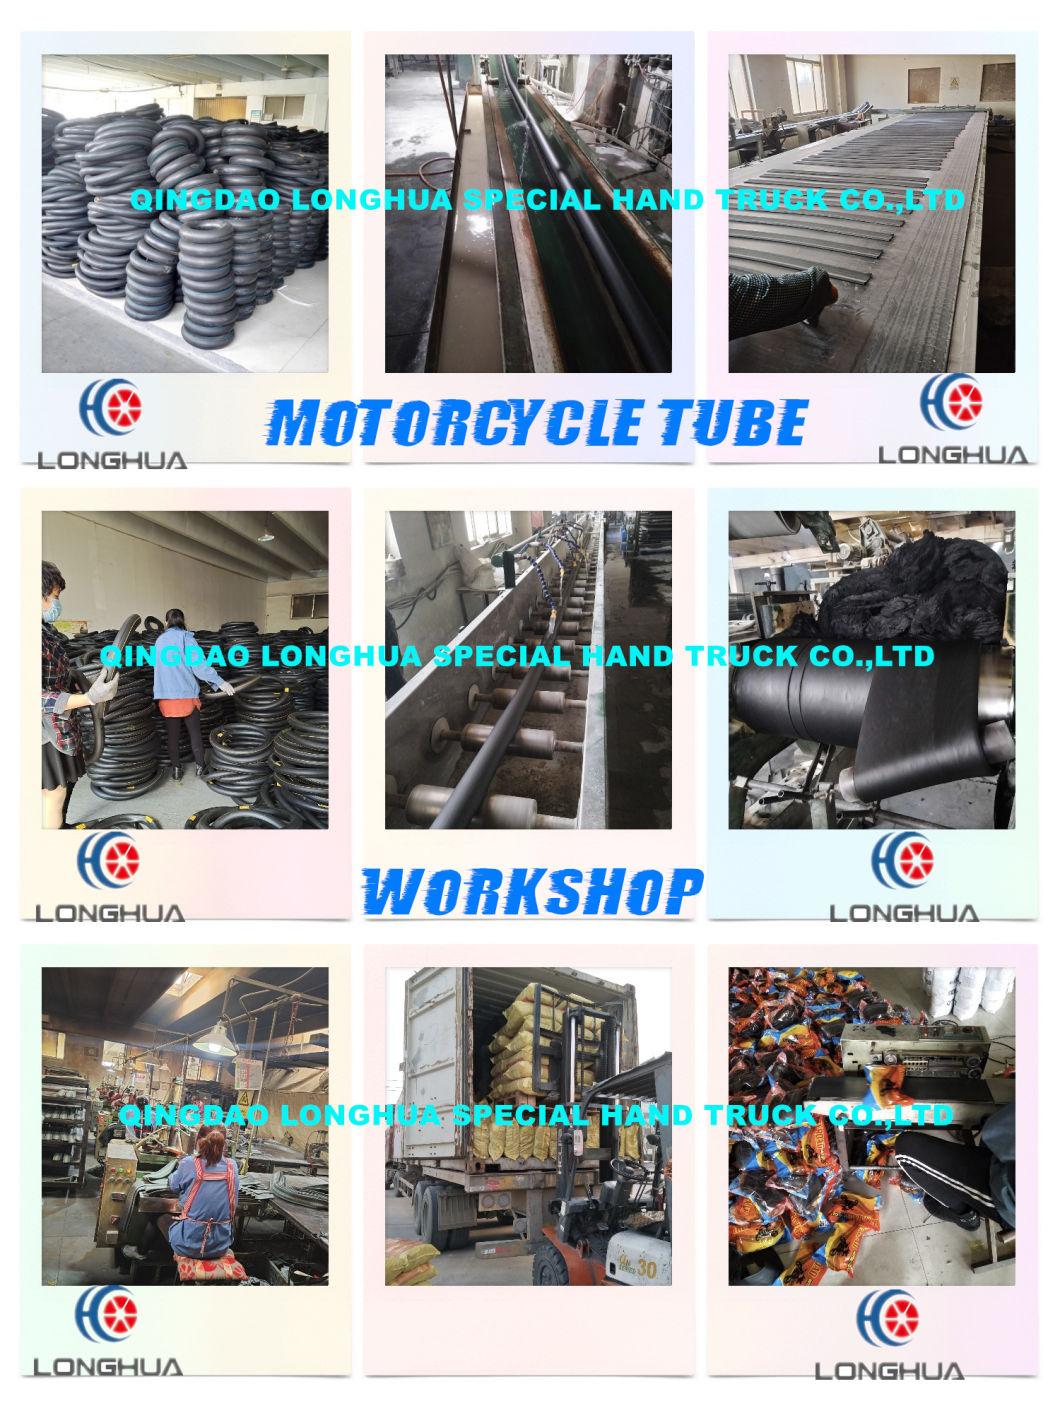 SGS Certificated Motorcycle Tyre and Motorcycle Tube (3.00-10)